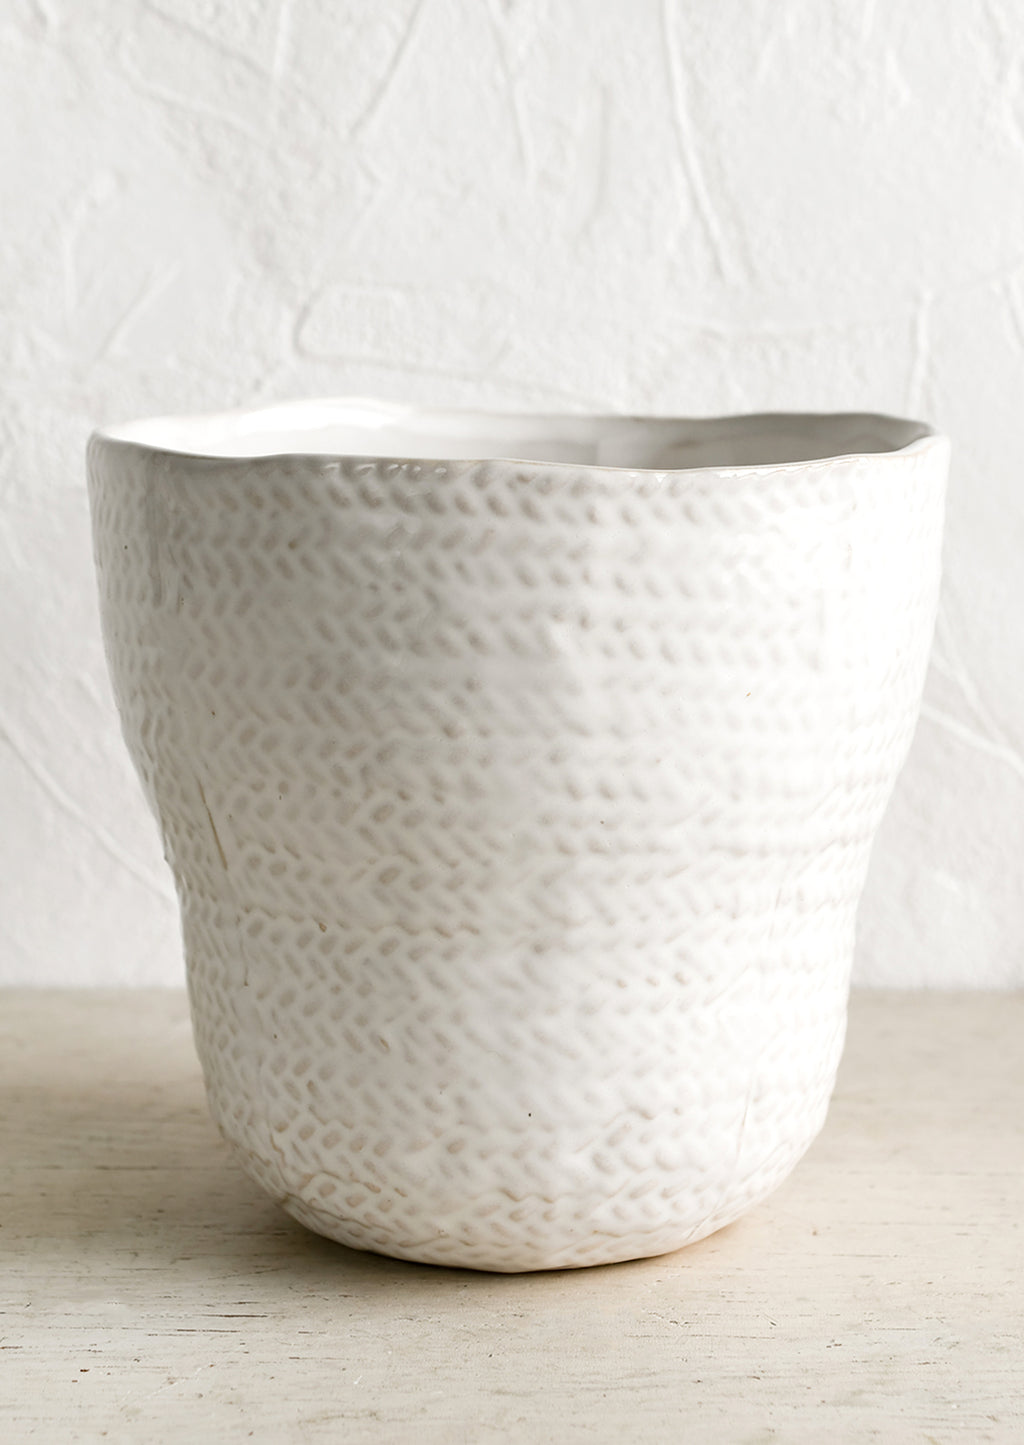 2: A white ceramic planter with basket shape and texture.